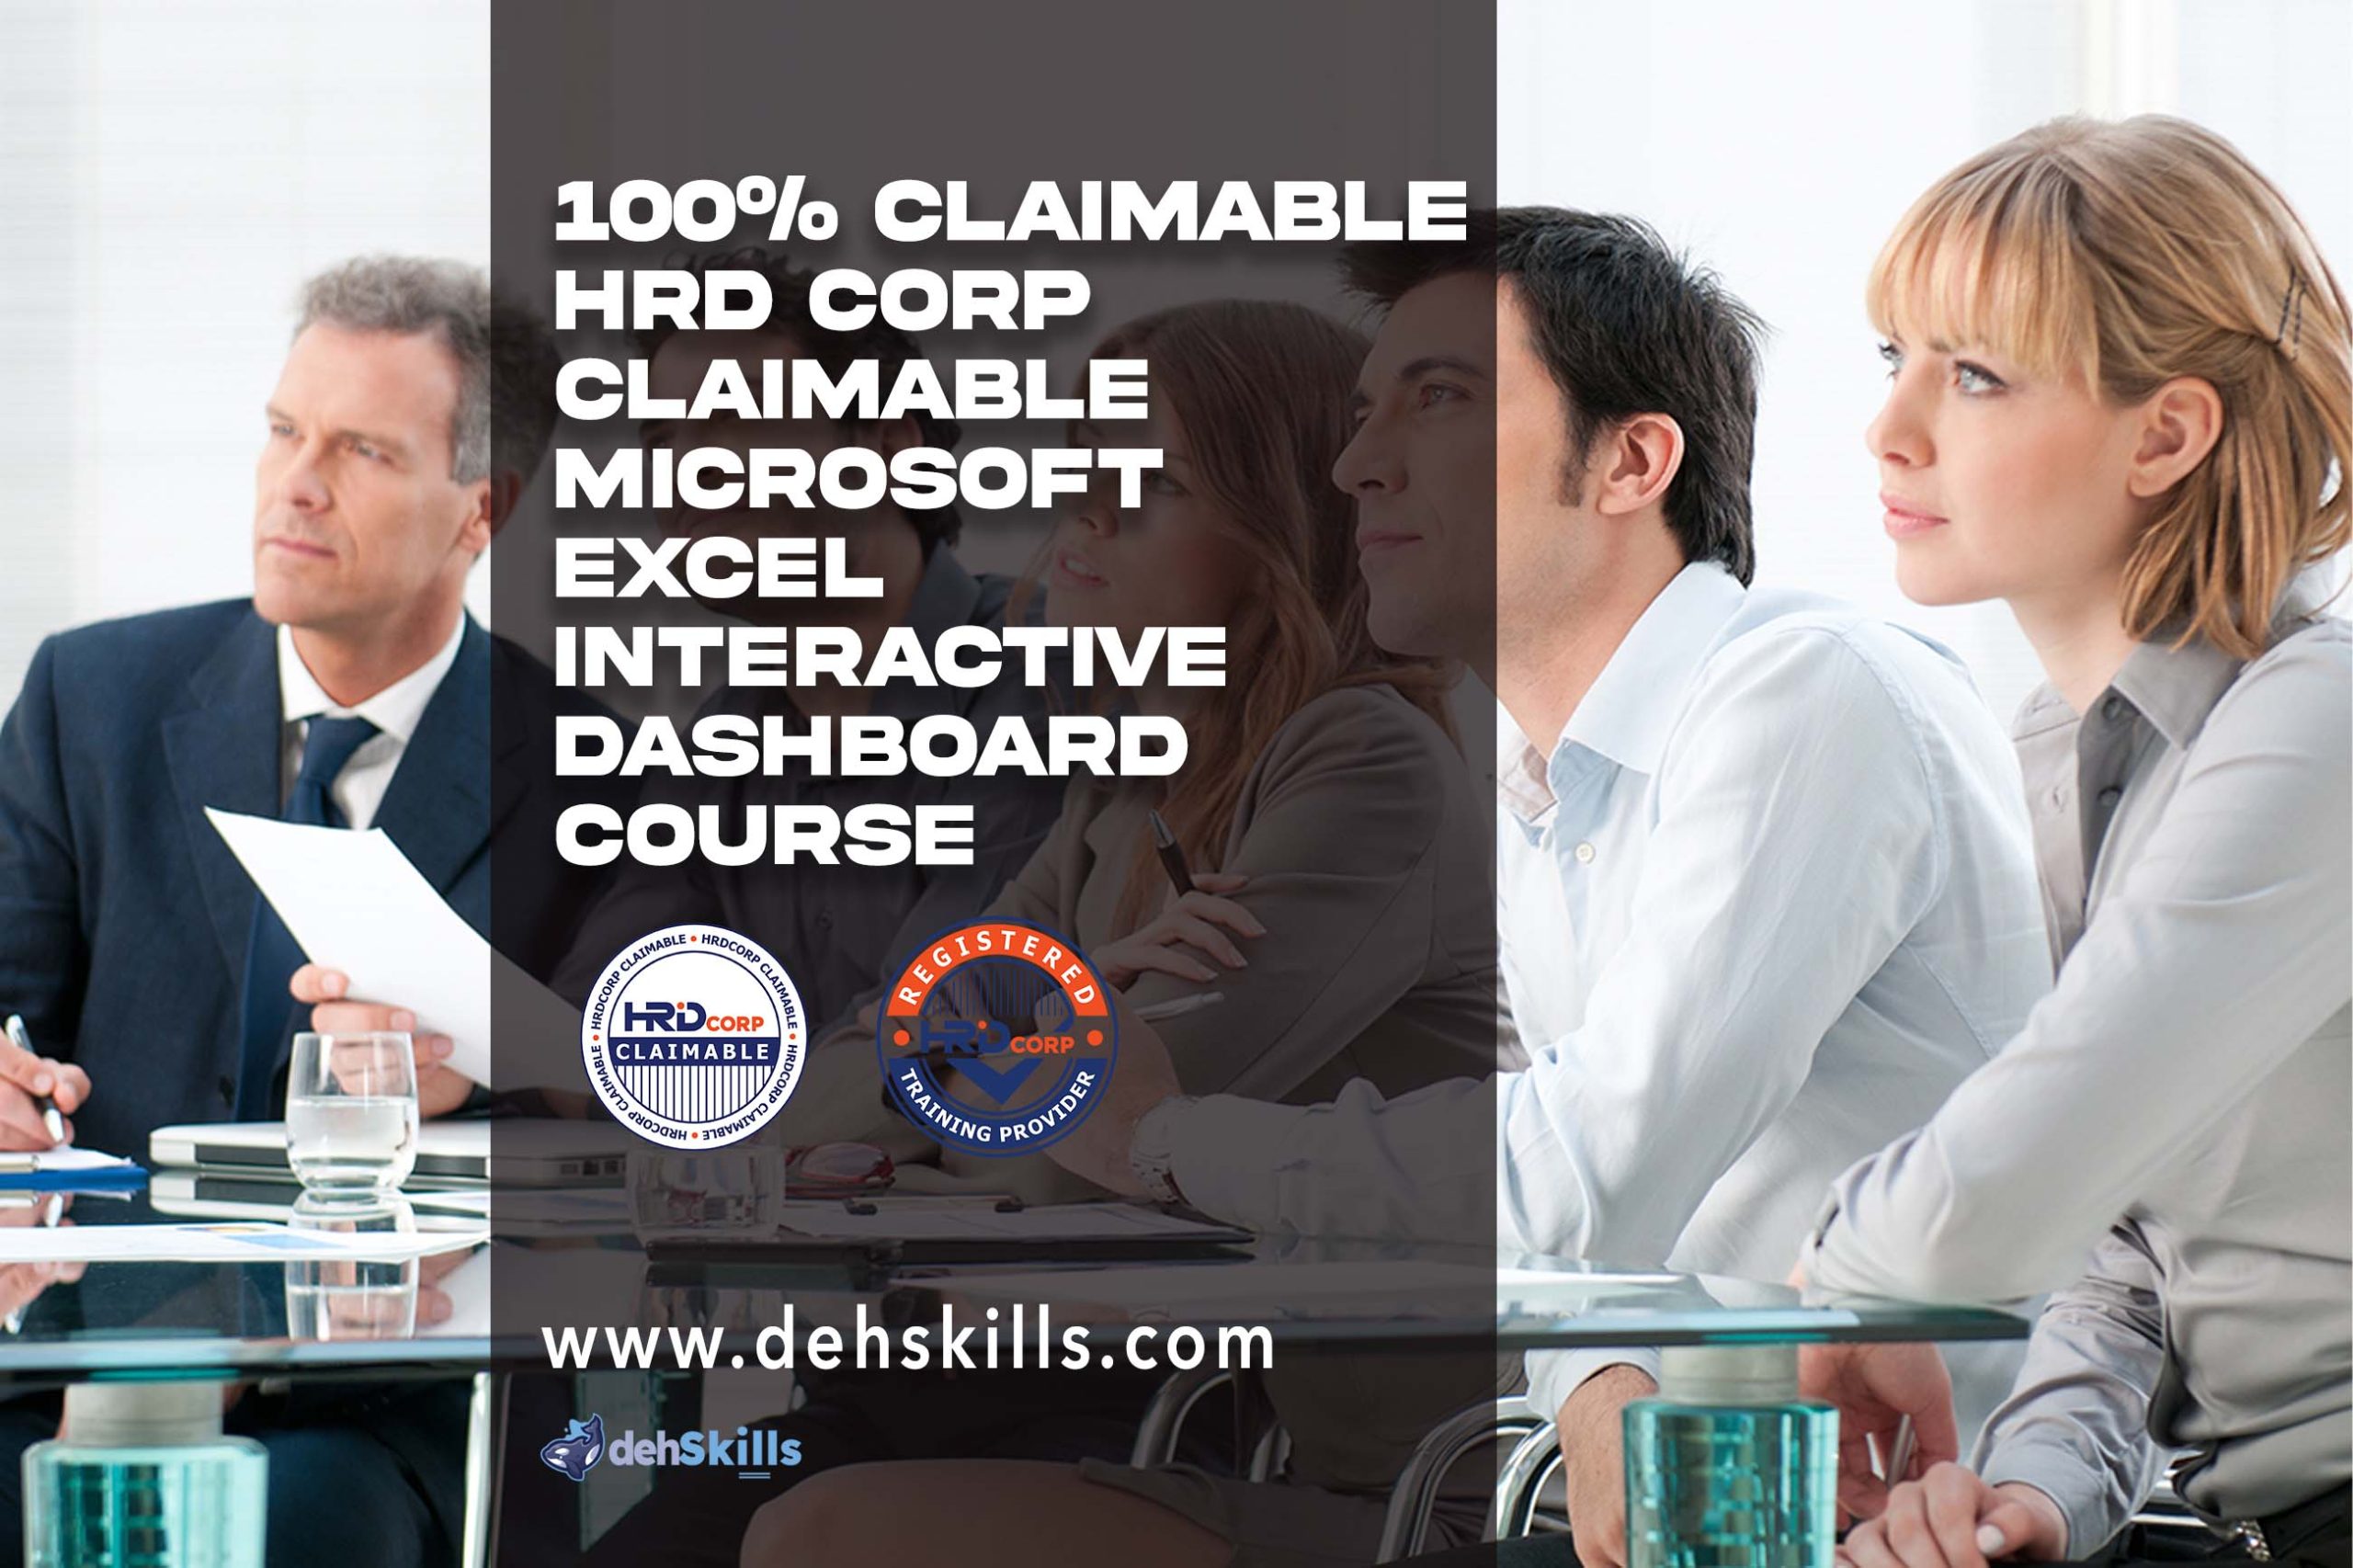 HRDF HRD Corp Claimable Microsoft Excel Interactive Dashboard Training